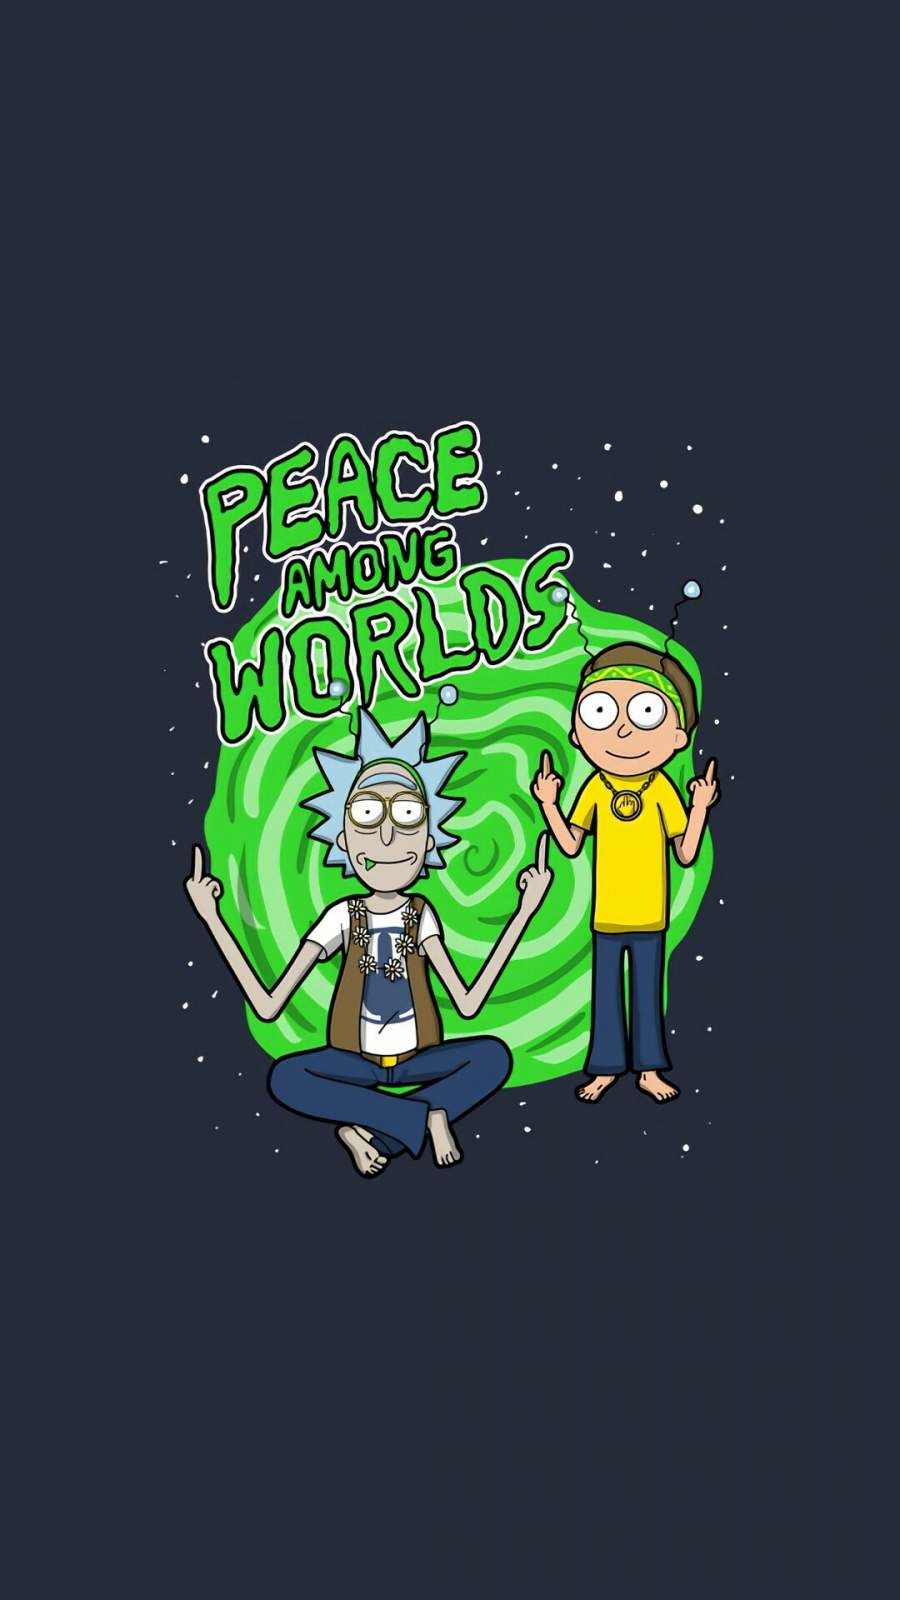 Rick and Morty Peace Among Words iPhone Wallpaper. Rick and morty stickers, Rick and morty quotes, Rick and morty poster